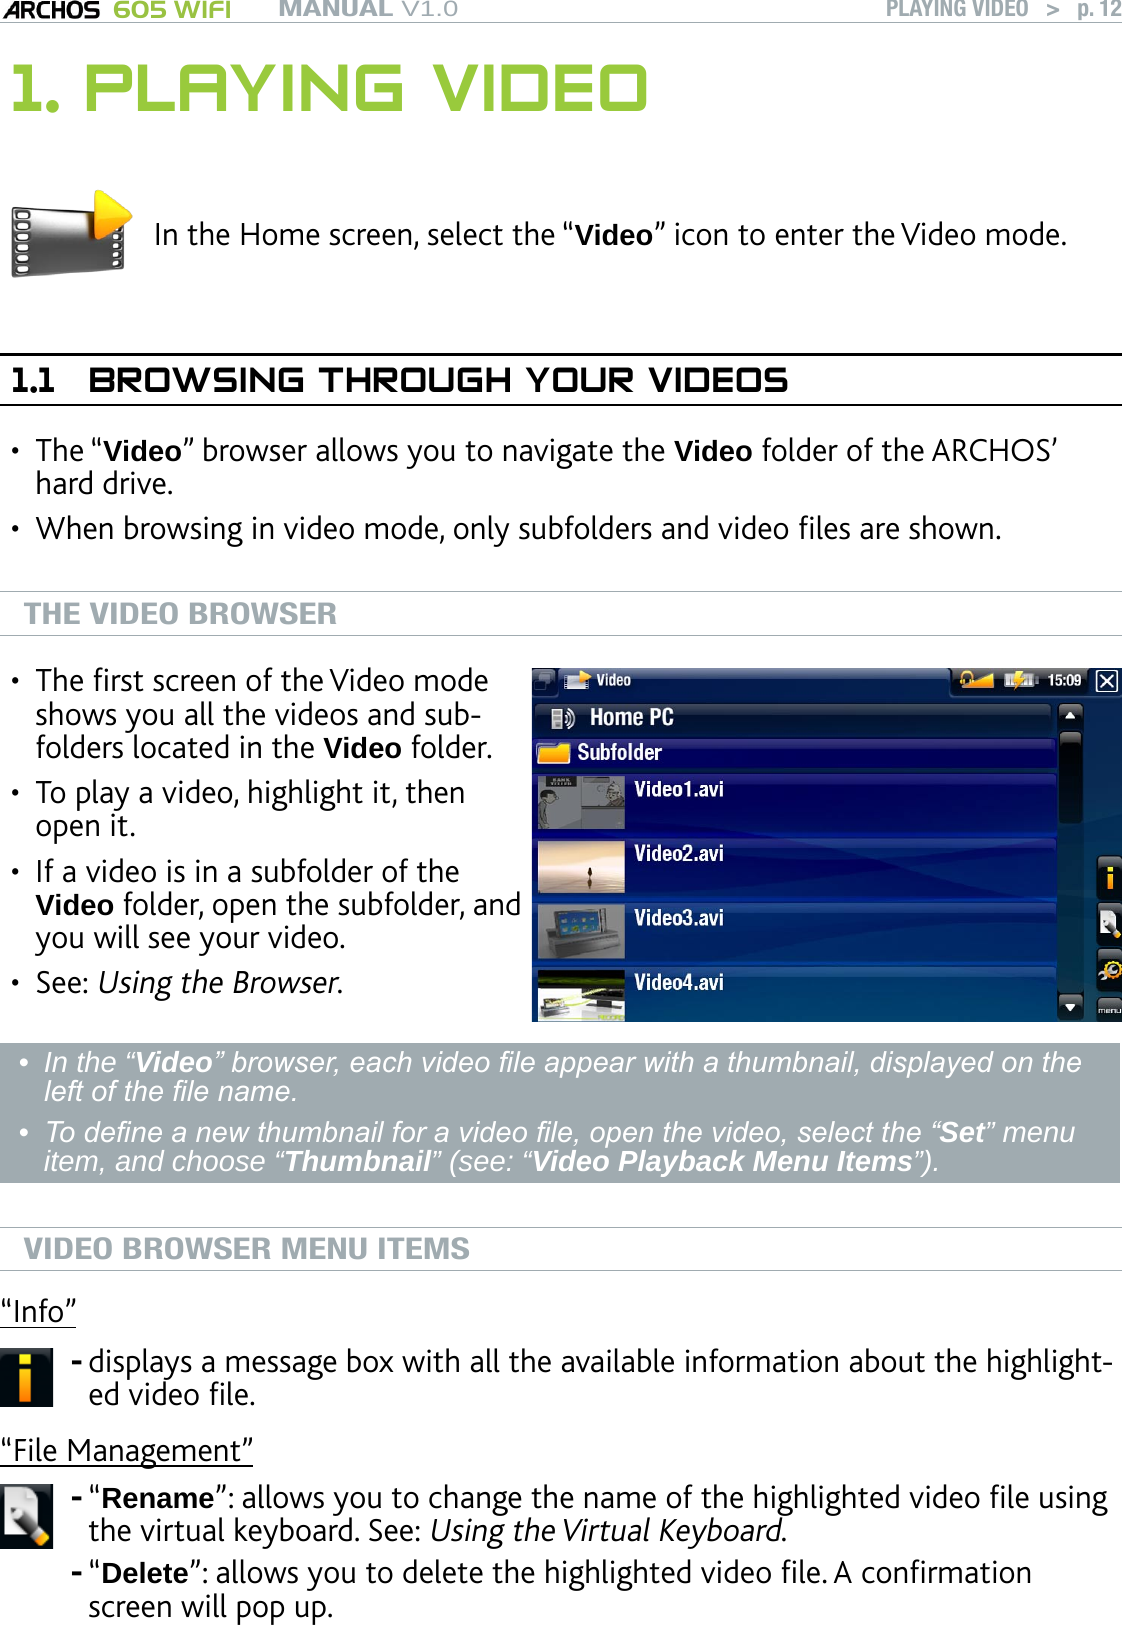 MANUAL V1.0 605 WIFI PLAYING VIDEO   &gt;   p. 121. PLAYING VIDEOIn the Home screen, select the “Video” icon to enter the Video mode.1.1  BROWSING THROUGH YOUR VIDEOSThe “Video” browser allows you to navigate the Video folder of the ARCHOS’ hard drive. When browsing in video mode, only subfolders and video les are shown.THE VIDEO BROWSERThe rst screen of the Video mode shows you all the videos and sub-folders located in the Video folder. To play a video, highlight it, then open it. If a video is in a subfolder of the Video folder, open the subfolder, and you will see your video.See: Using the Browser.••••In the “Video” browser, each video le appear with a thumbnail, displayed on the left of the le name. To dene a new thumbnail for a video le, open the video, select the “Set” menu item, and choose “Thumbnail” (see: “Video Playback Menu Items”). ••VIDEO BROWSER MENU ITEMS“Info”displays a message box with all the available information about the highlight-ed video le.-“File Management”“Rename”: allows you to change the name of the highlighted video le using the virtual keyboard. See: Using the Virtual Keyboard.“Delete”: allows you to delete the highlighted video le. A conrmation screen will pop up.--••